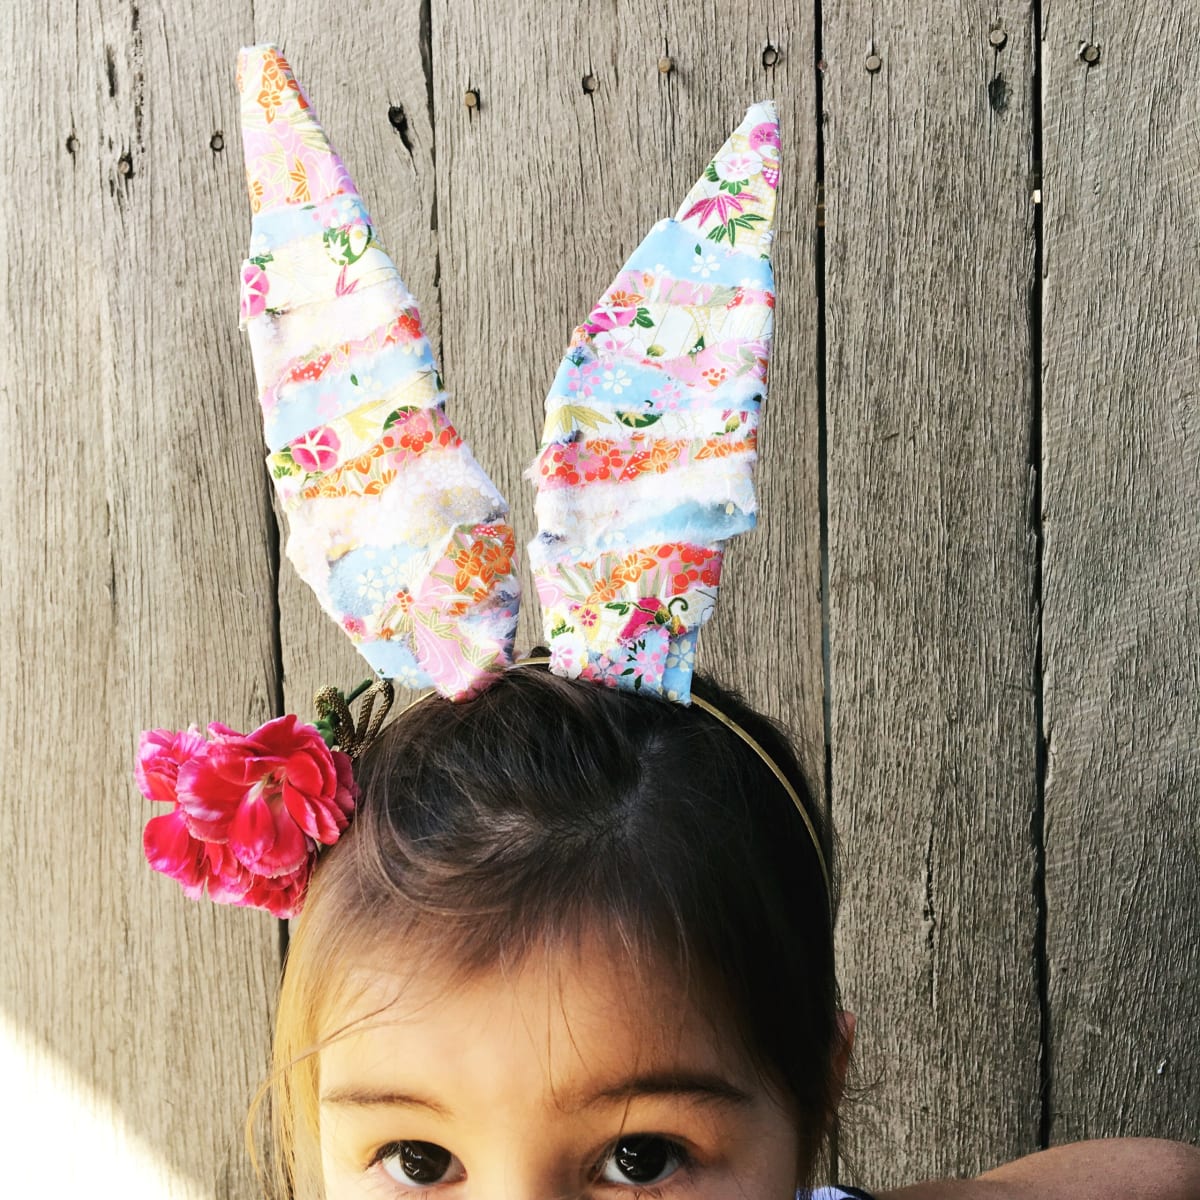 Make Easter bunny ears with paper and pipe cleaners